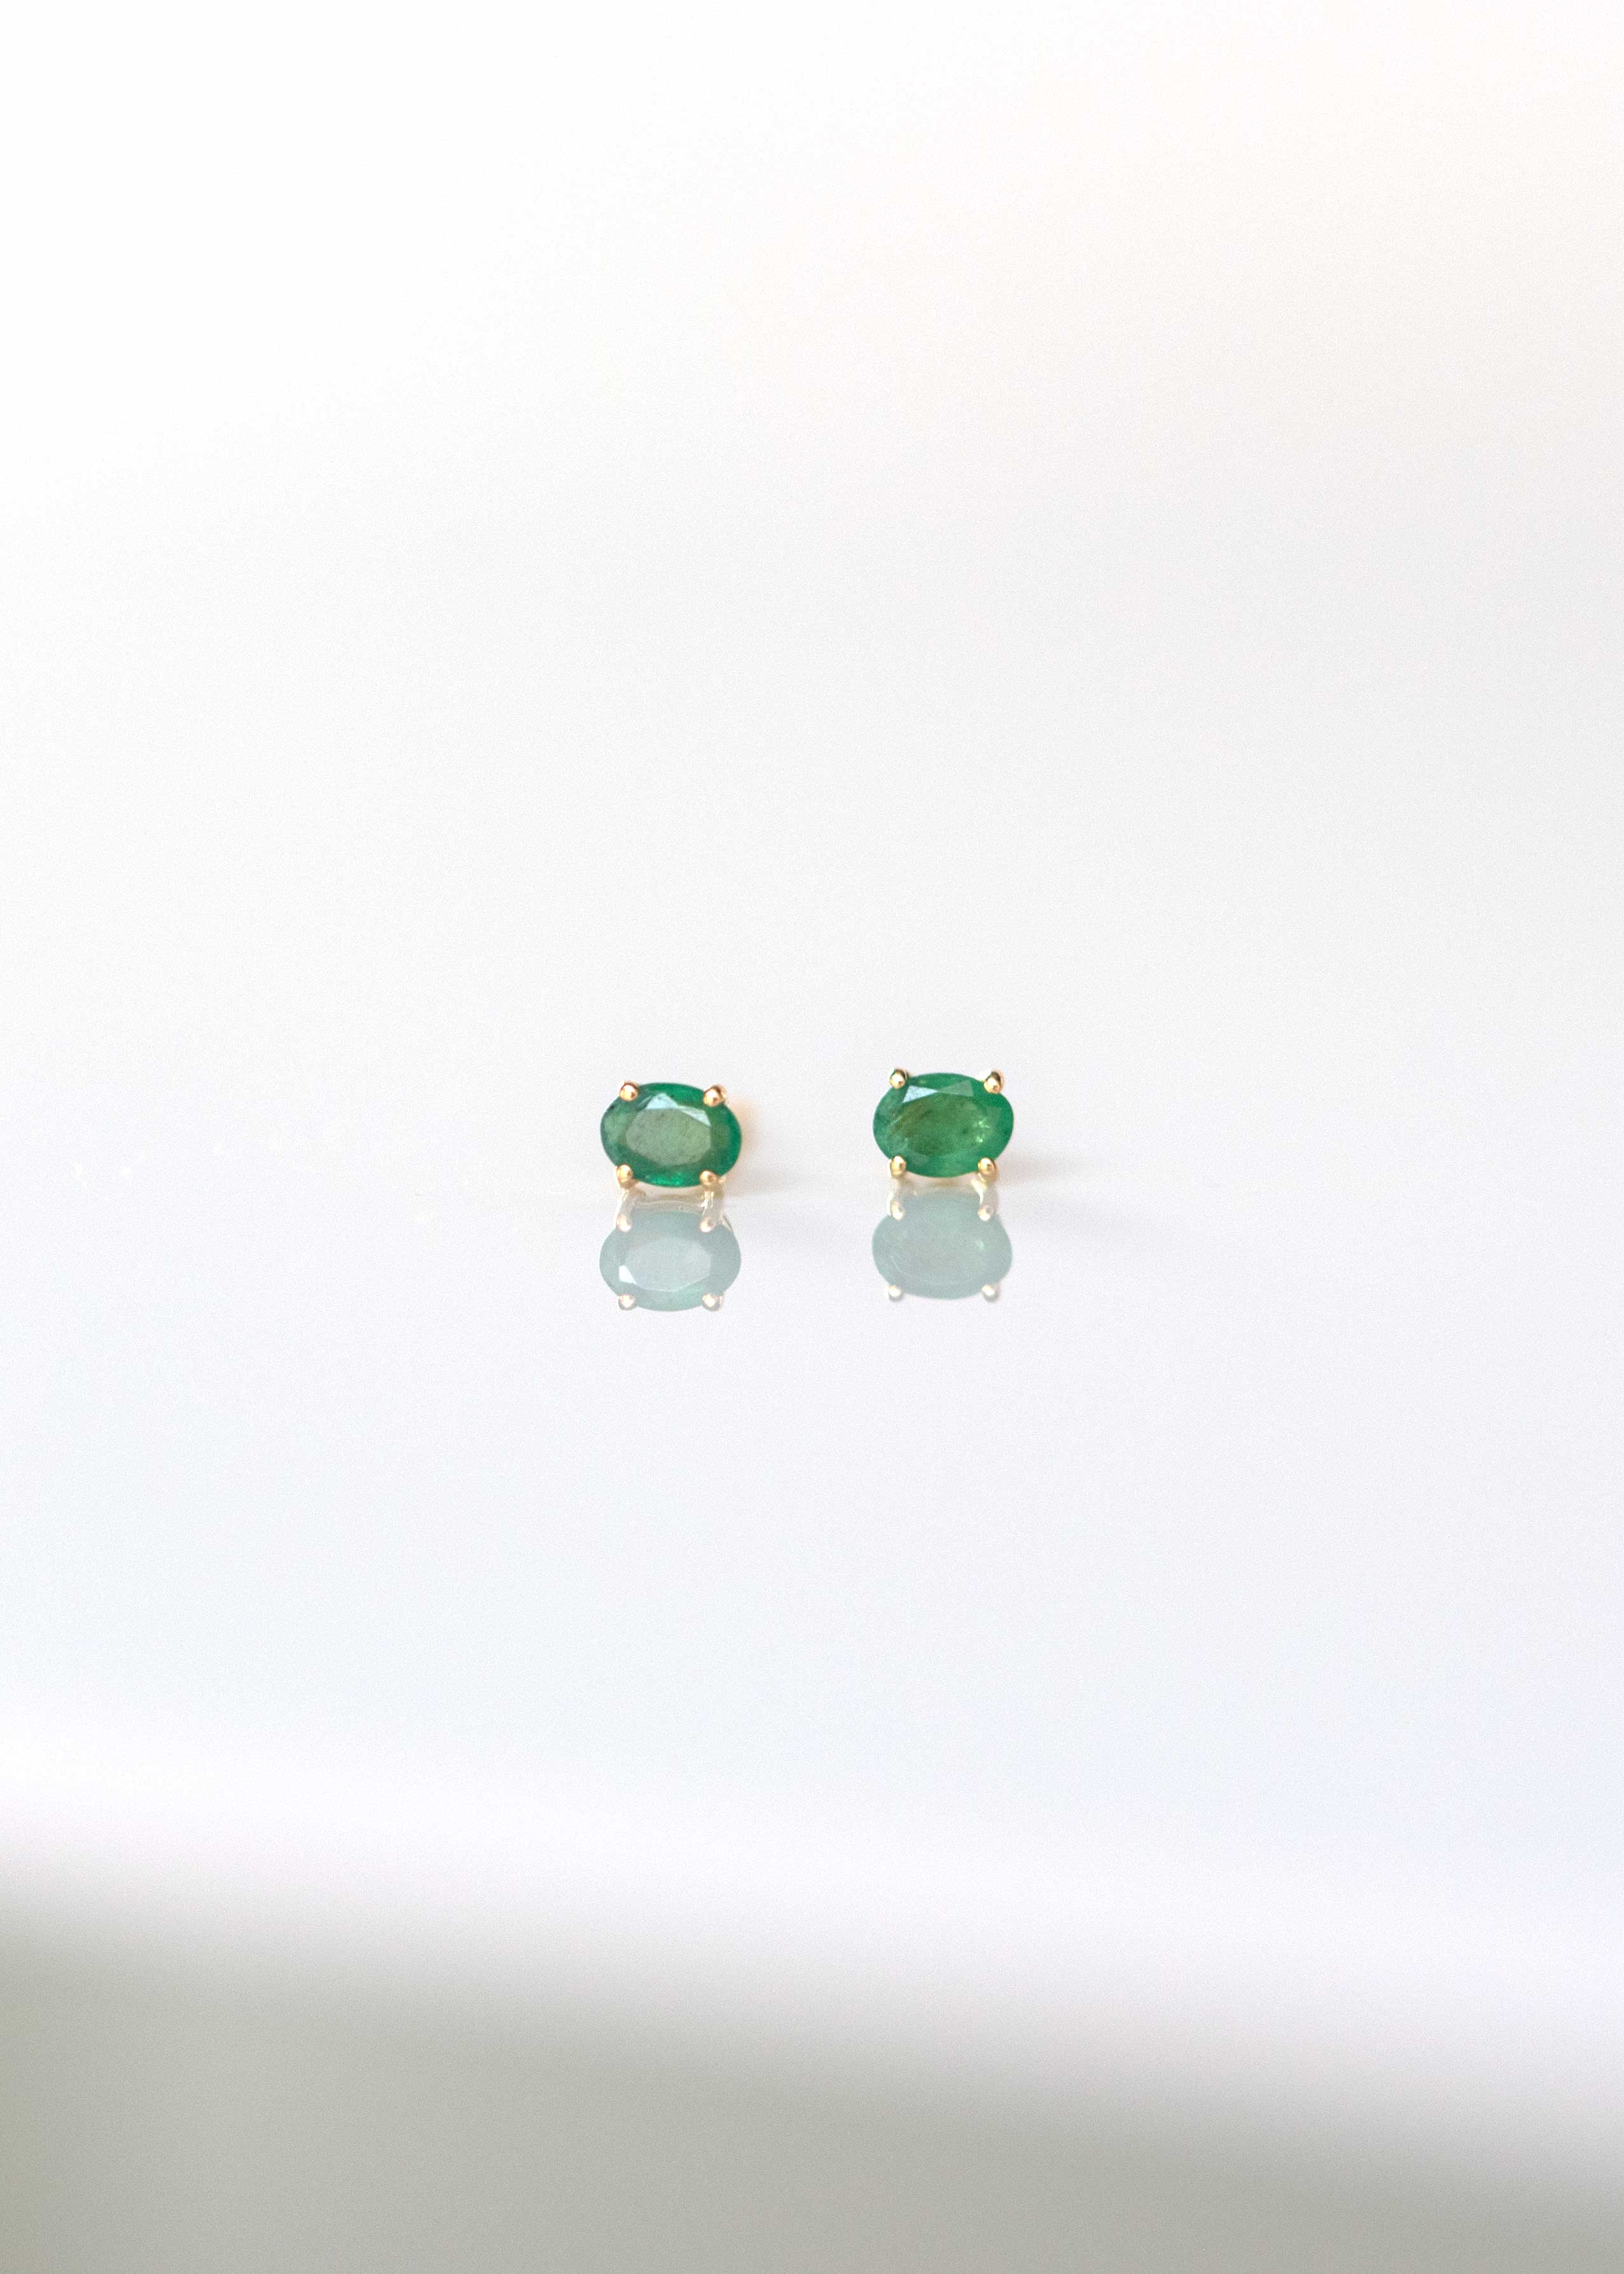 Gemstone earrings, cartilage dainty tiny studs for girls, best gifts, genuine green emerald